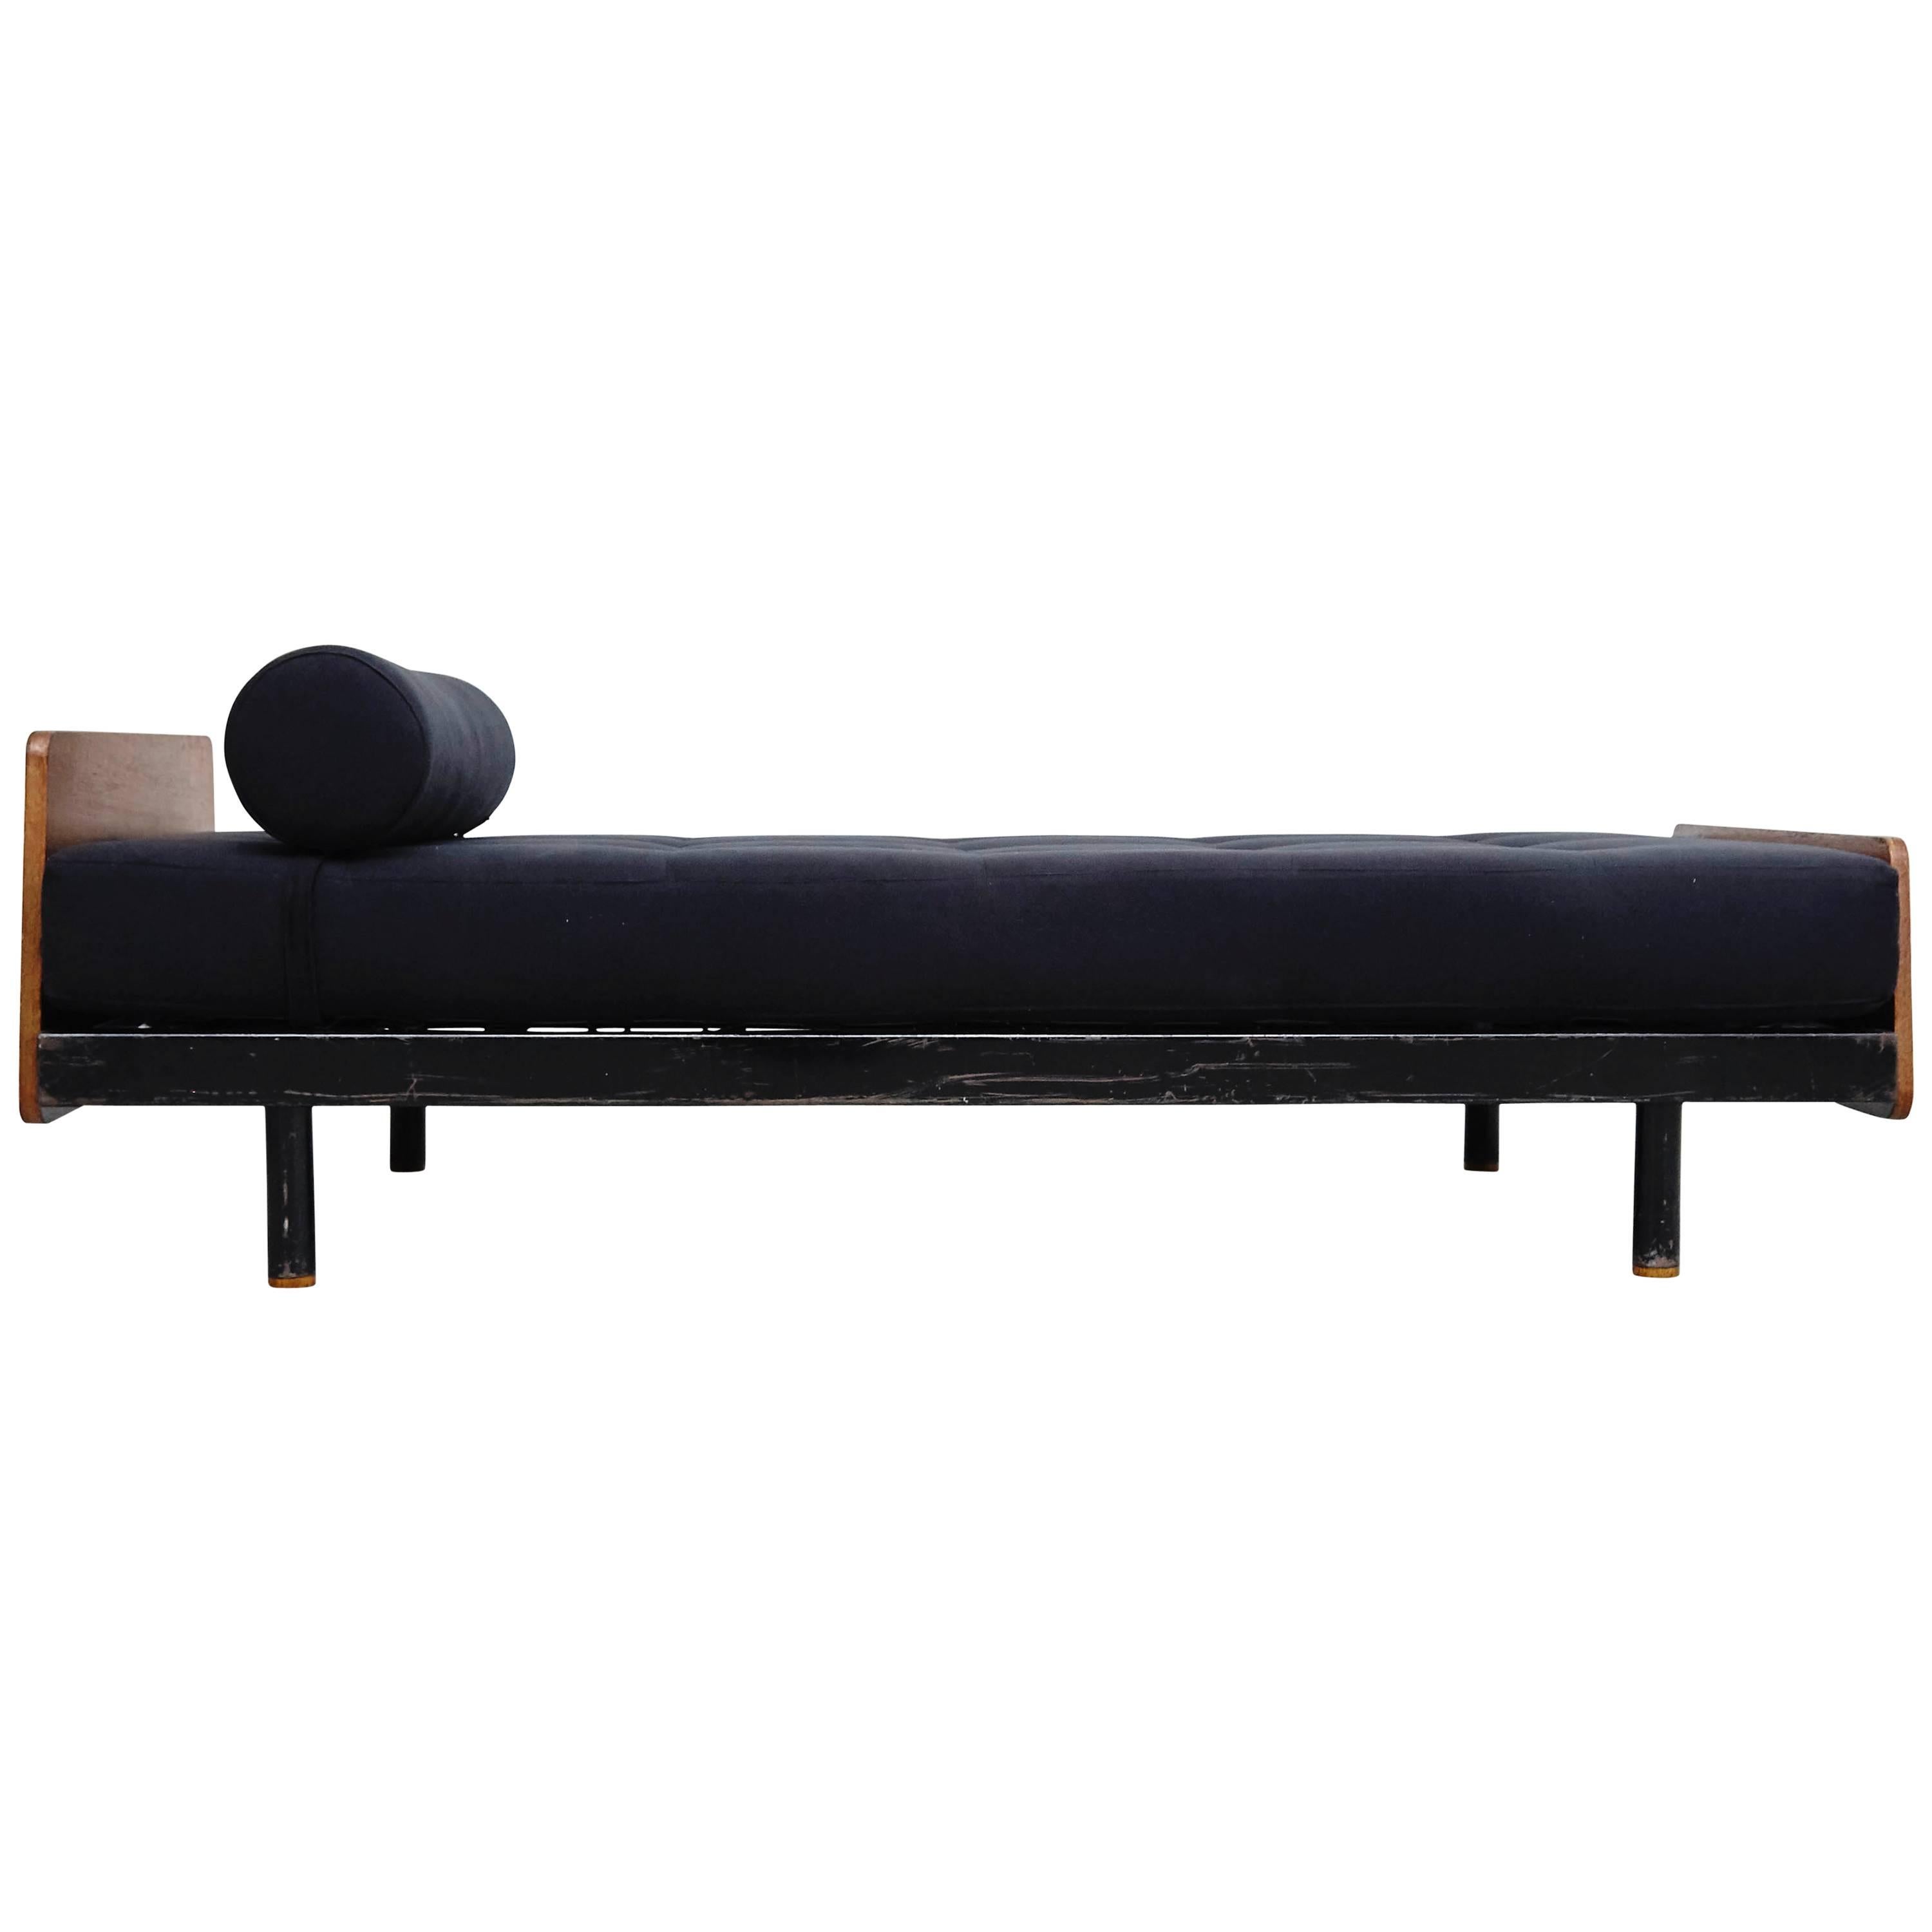 Jean Prouve Daybed, circa 1950